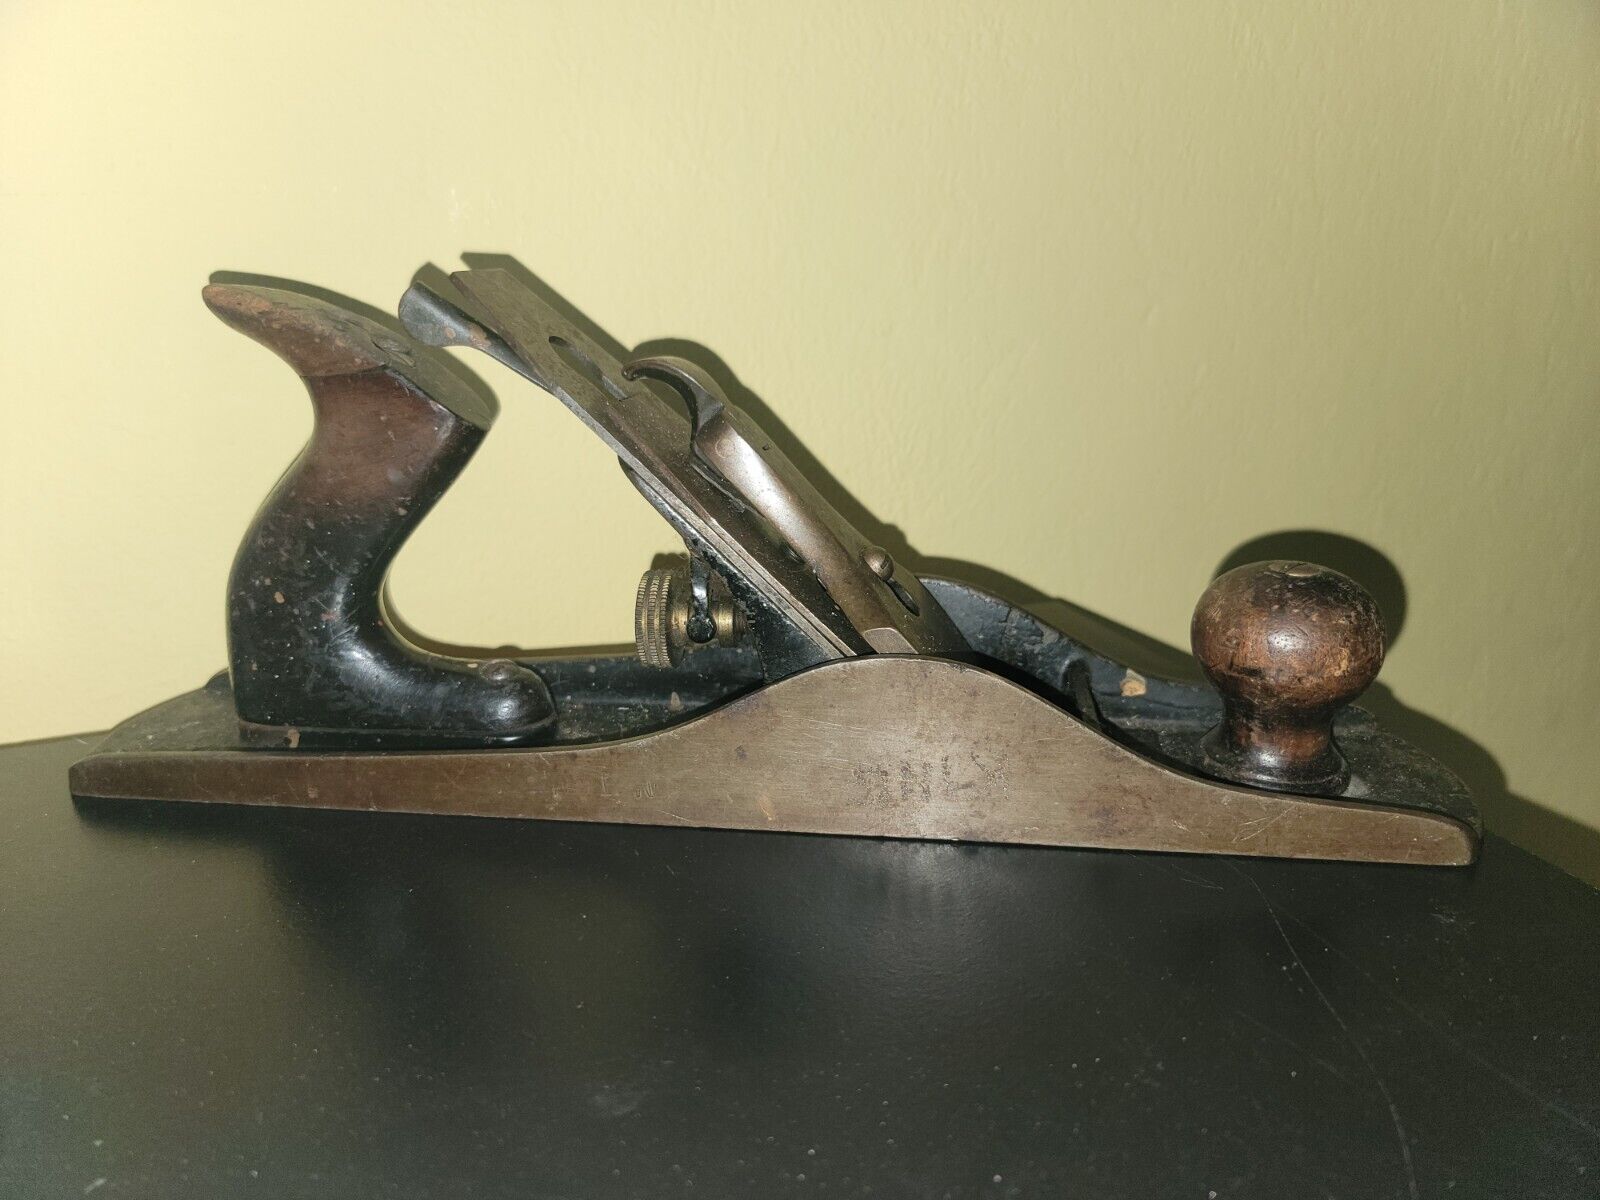 Vintage Fulton Bench Plane Made In U.S.A. Antique  Wood Rare FULTON Warranted